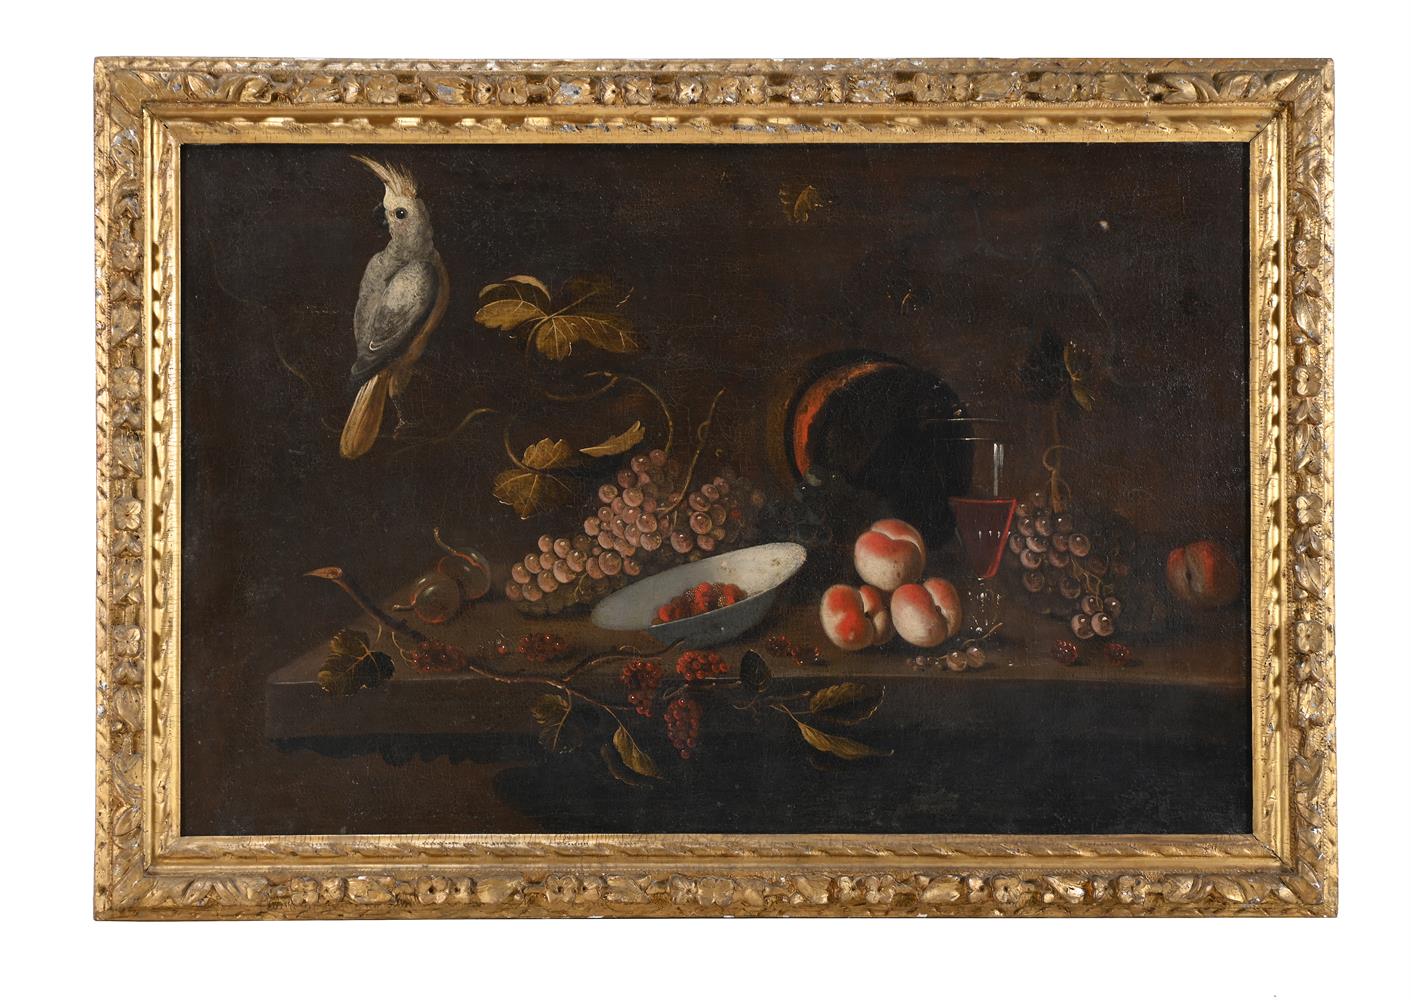 ITALIAN SCHOOL (LATE 17TH/EARLY 18TH CENTURY), STILL LIFE OF FRUIT AND A PARROT - Image 2 of 3